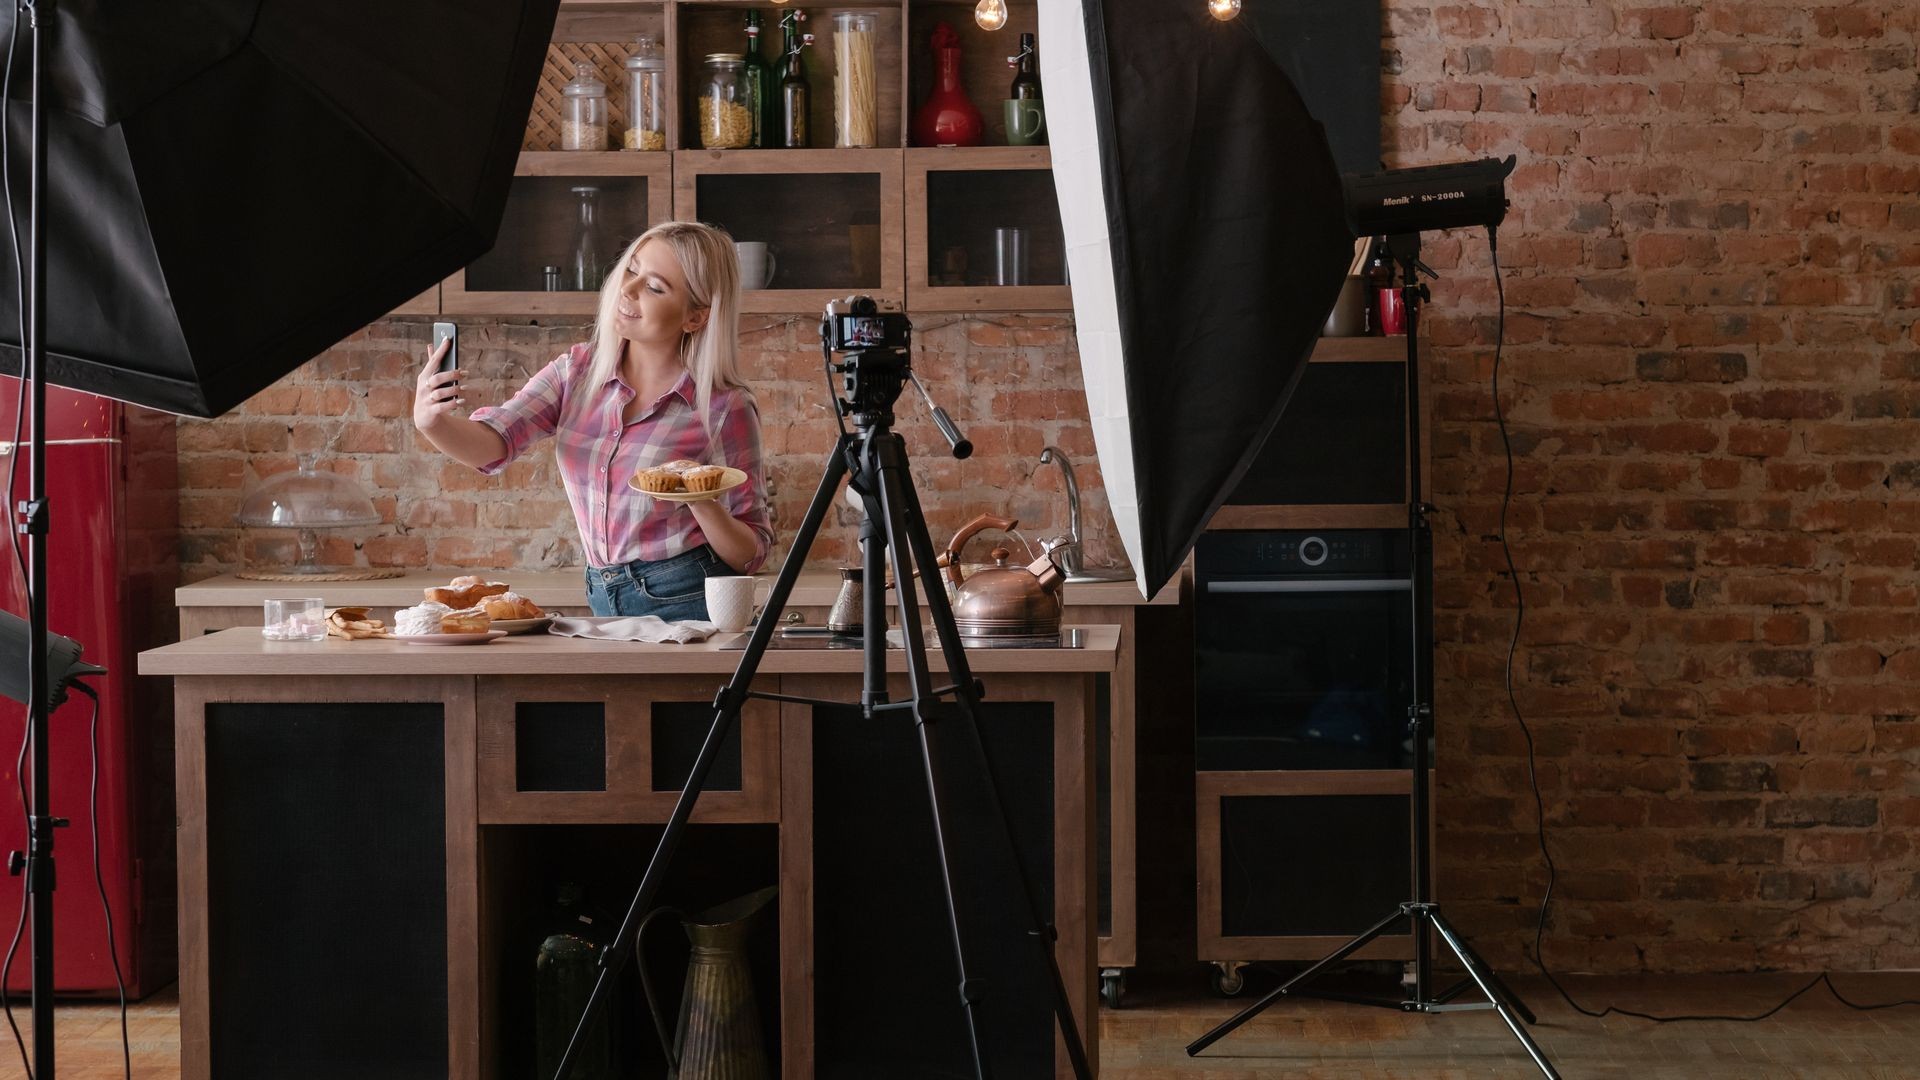 Homemade bakery. Cooking blog. Backstage photography. Smiling young woman with pastries taking selfie. Copy space.